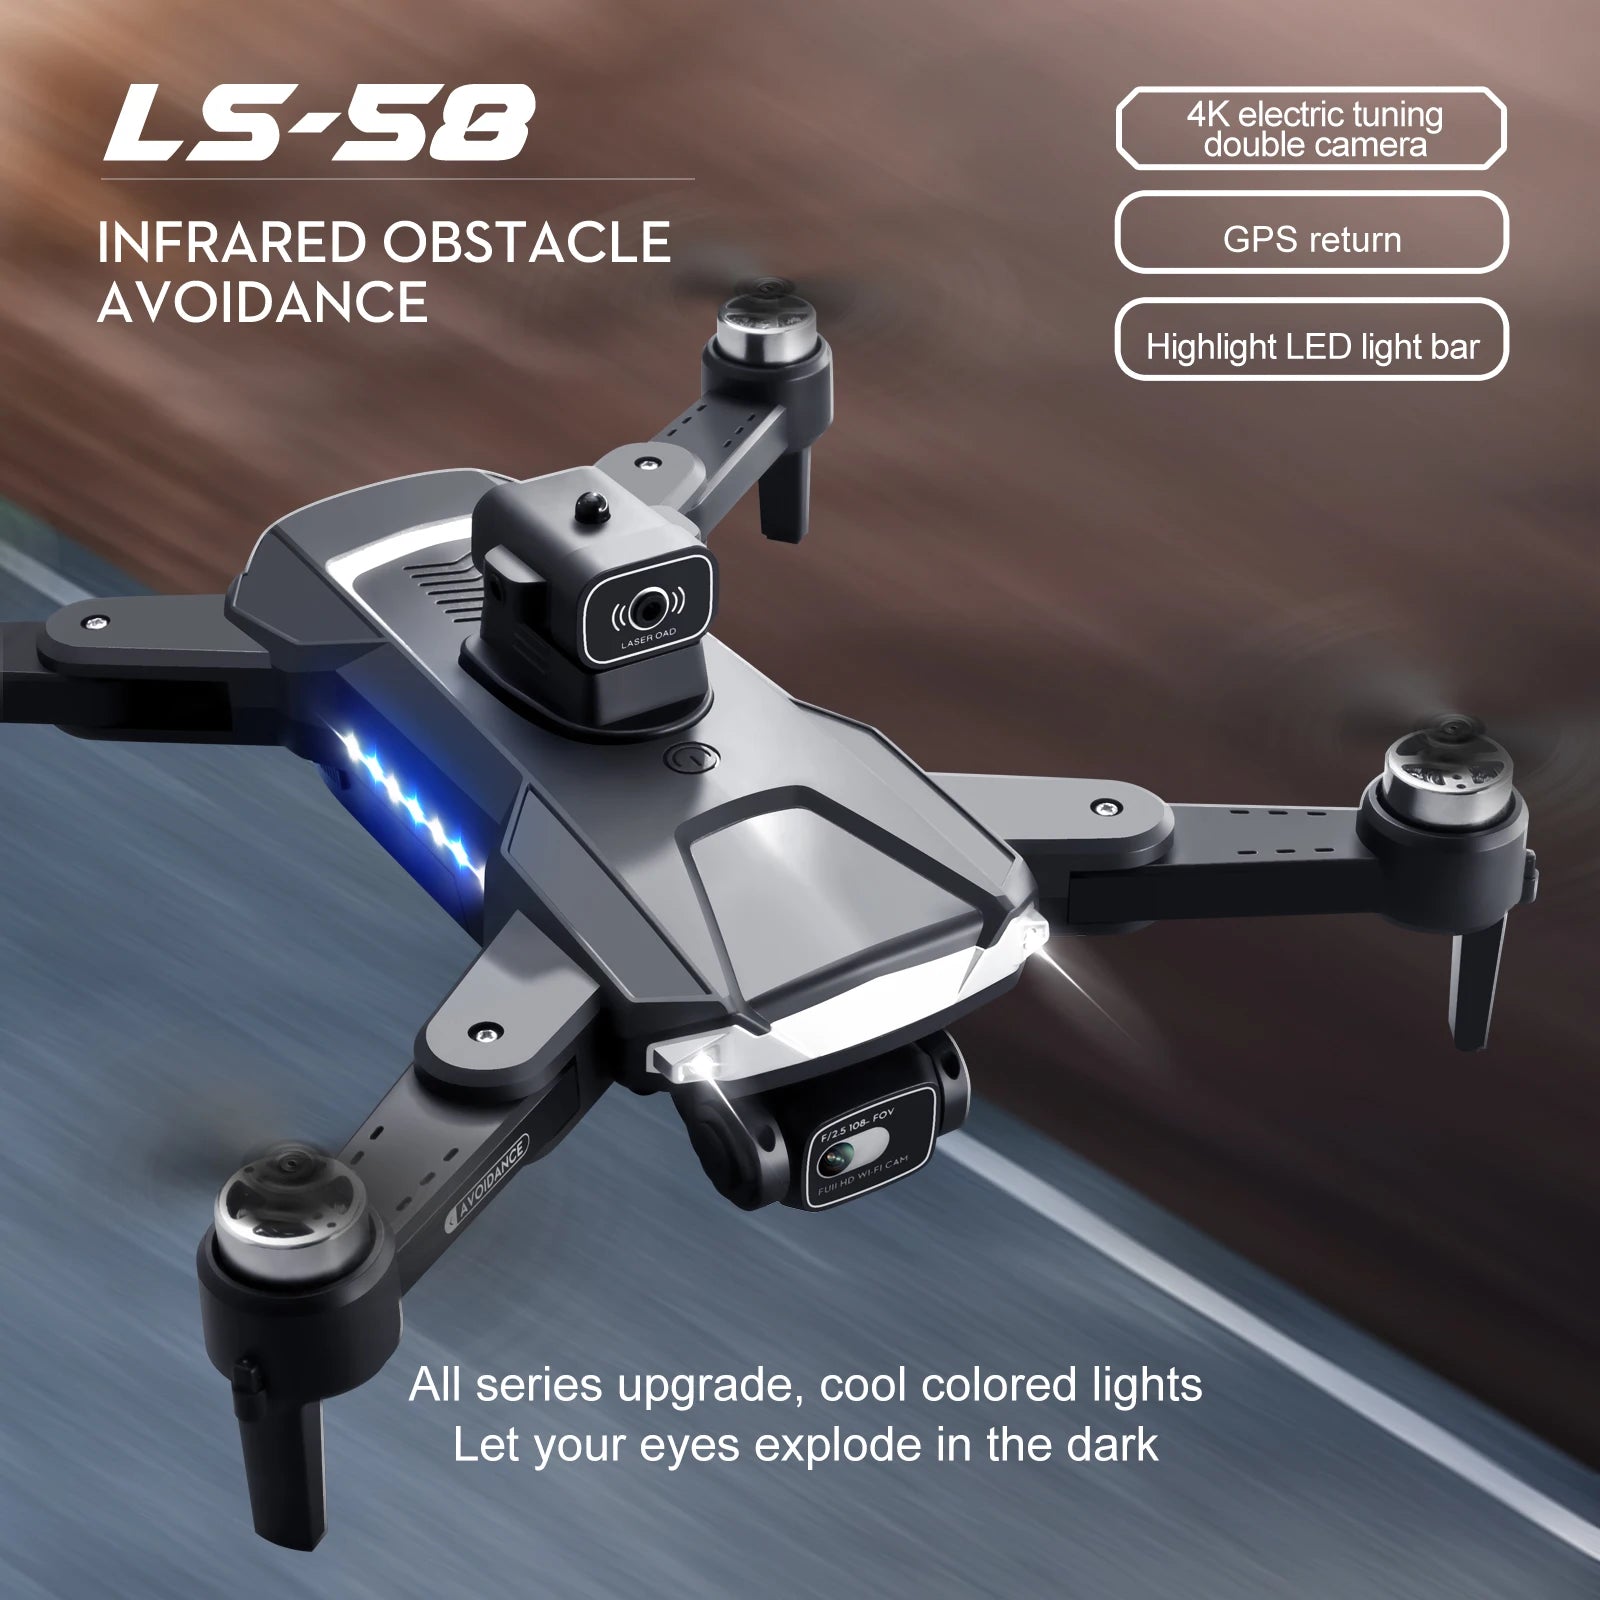 LS58 Drone, ls-5d 4k electric tuning double camera infrare